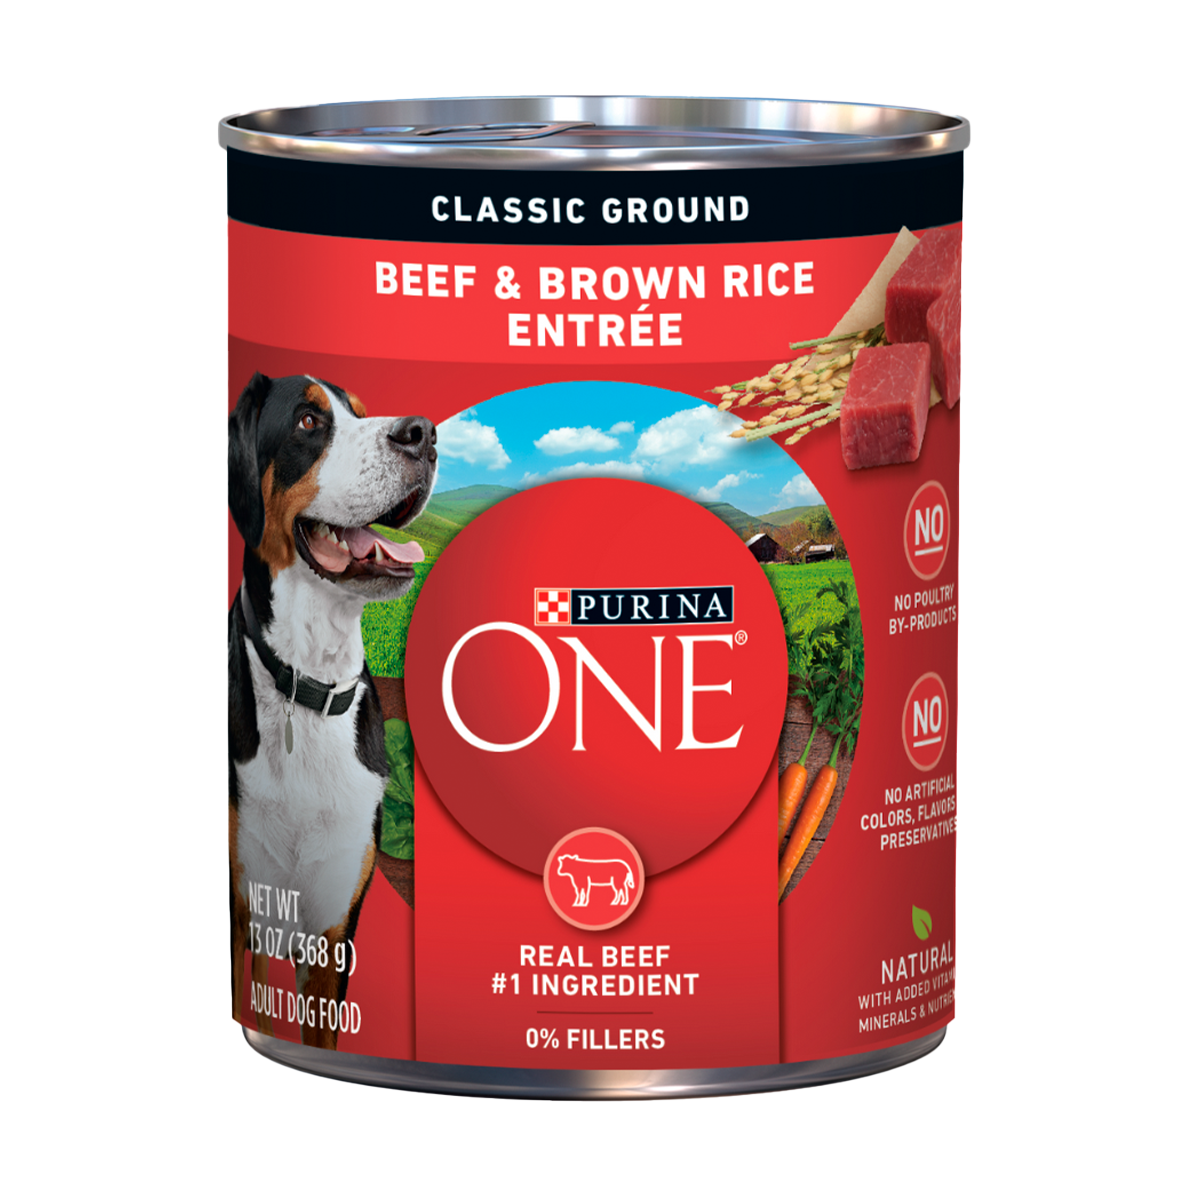 purina-one-wet-beef-%26-brown-rice-entr%C3%A9e-classic.png